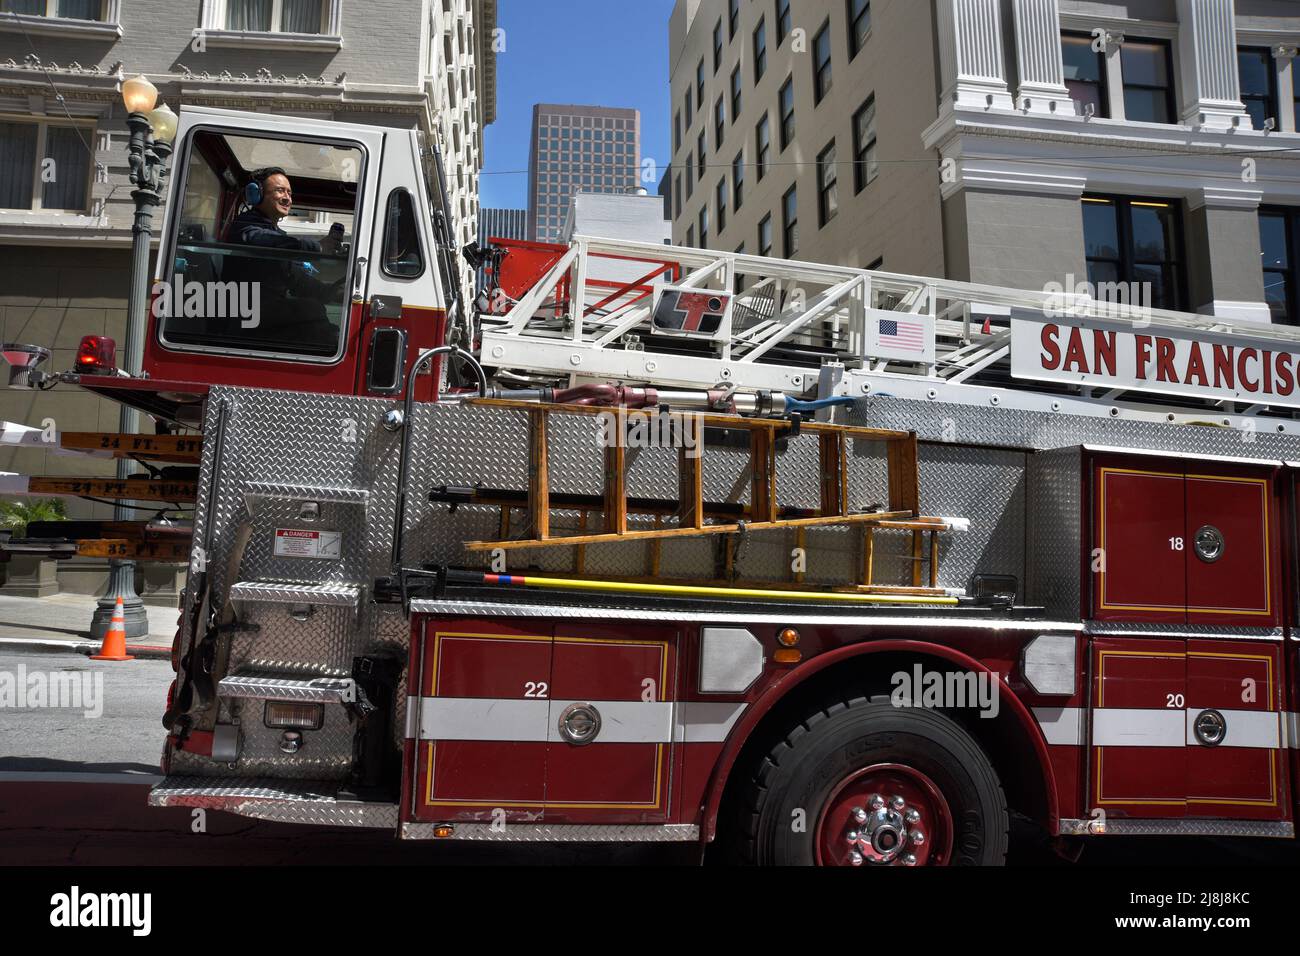 A tiller fire truck with steering wheels both the front and back moves  along a street in San Francisco, California. A tillerman sits in the rear  Stock Photo - Alamy